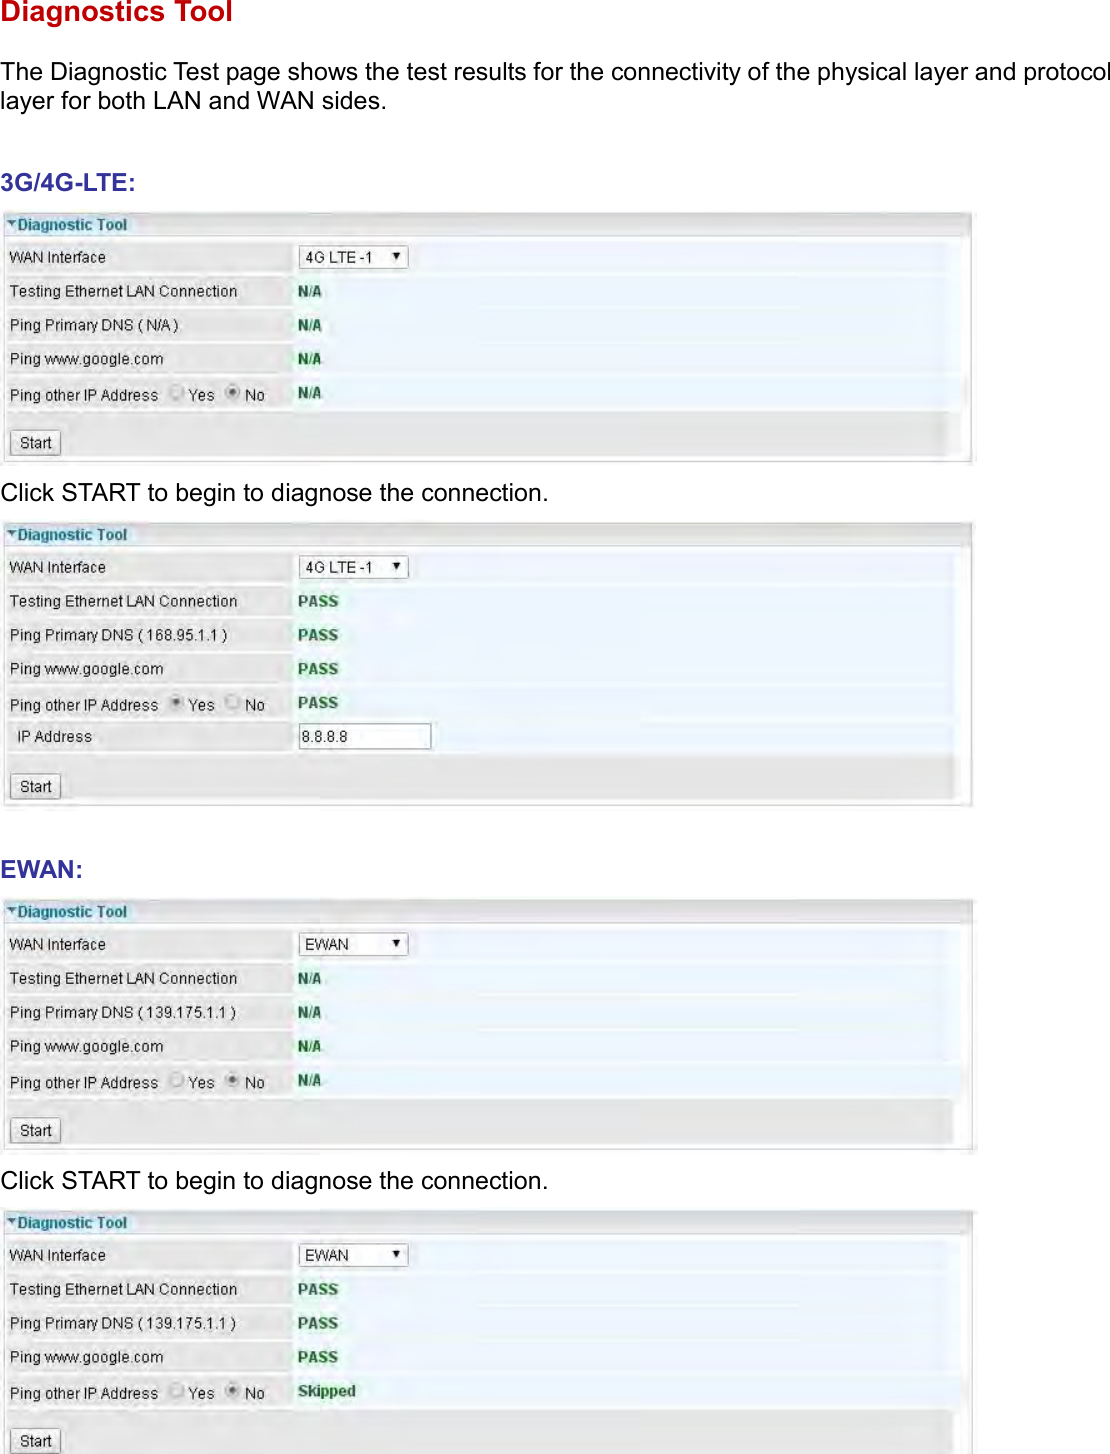    Diagnostics Tool The Diagnostic Test page shows the test results for the connectivity of the physical layer and protocol layer for both LAN and WAN sides.  3G/4G-LTE:  Click START to begin to diagnose the connection.   EWAN:  Click START to begin to diagnose the connection.   